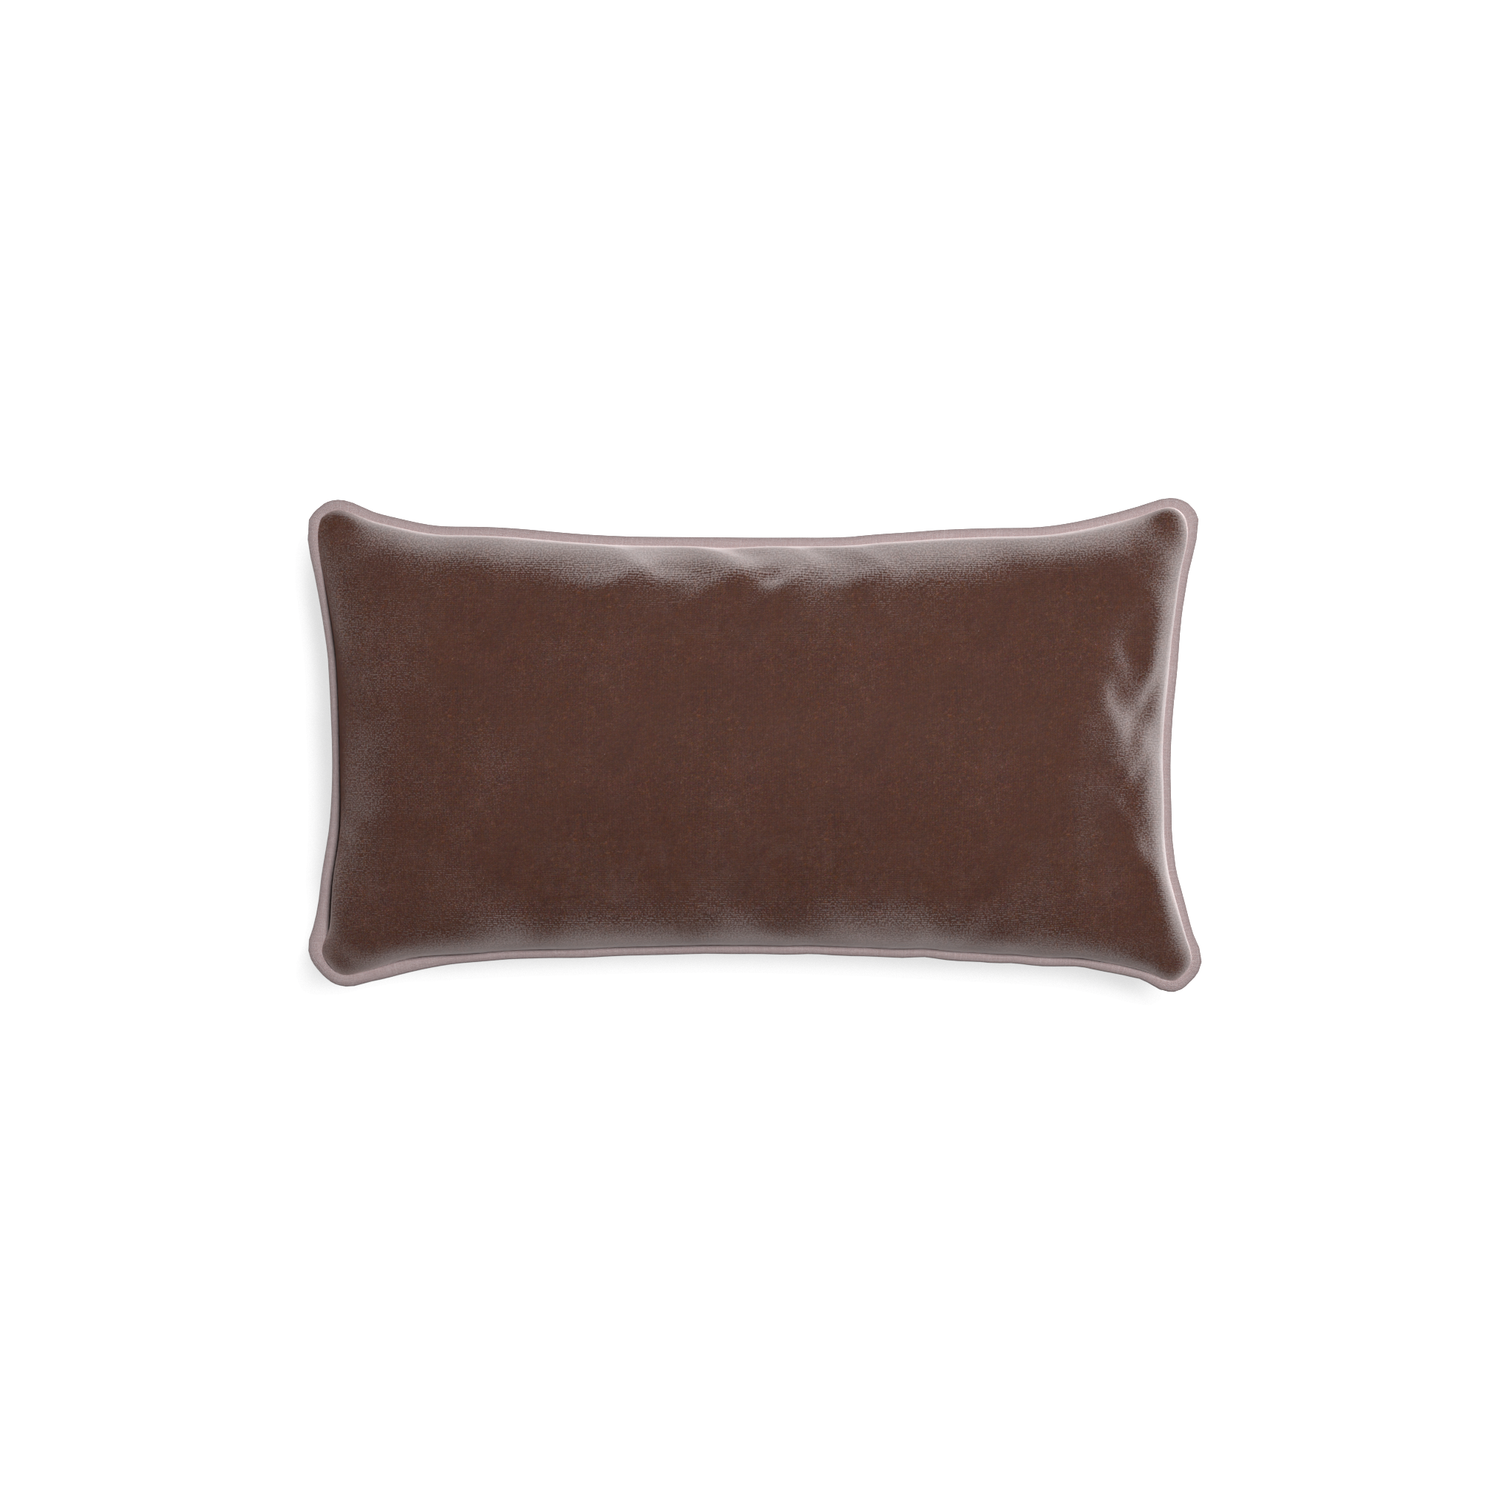 Petite-lumbar walnut velvet custom brownpillow with orchid piping on white background